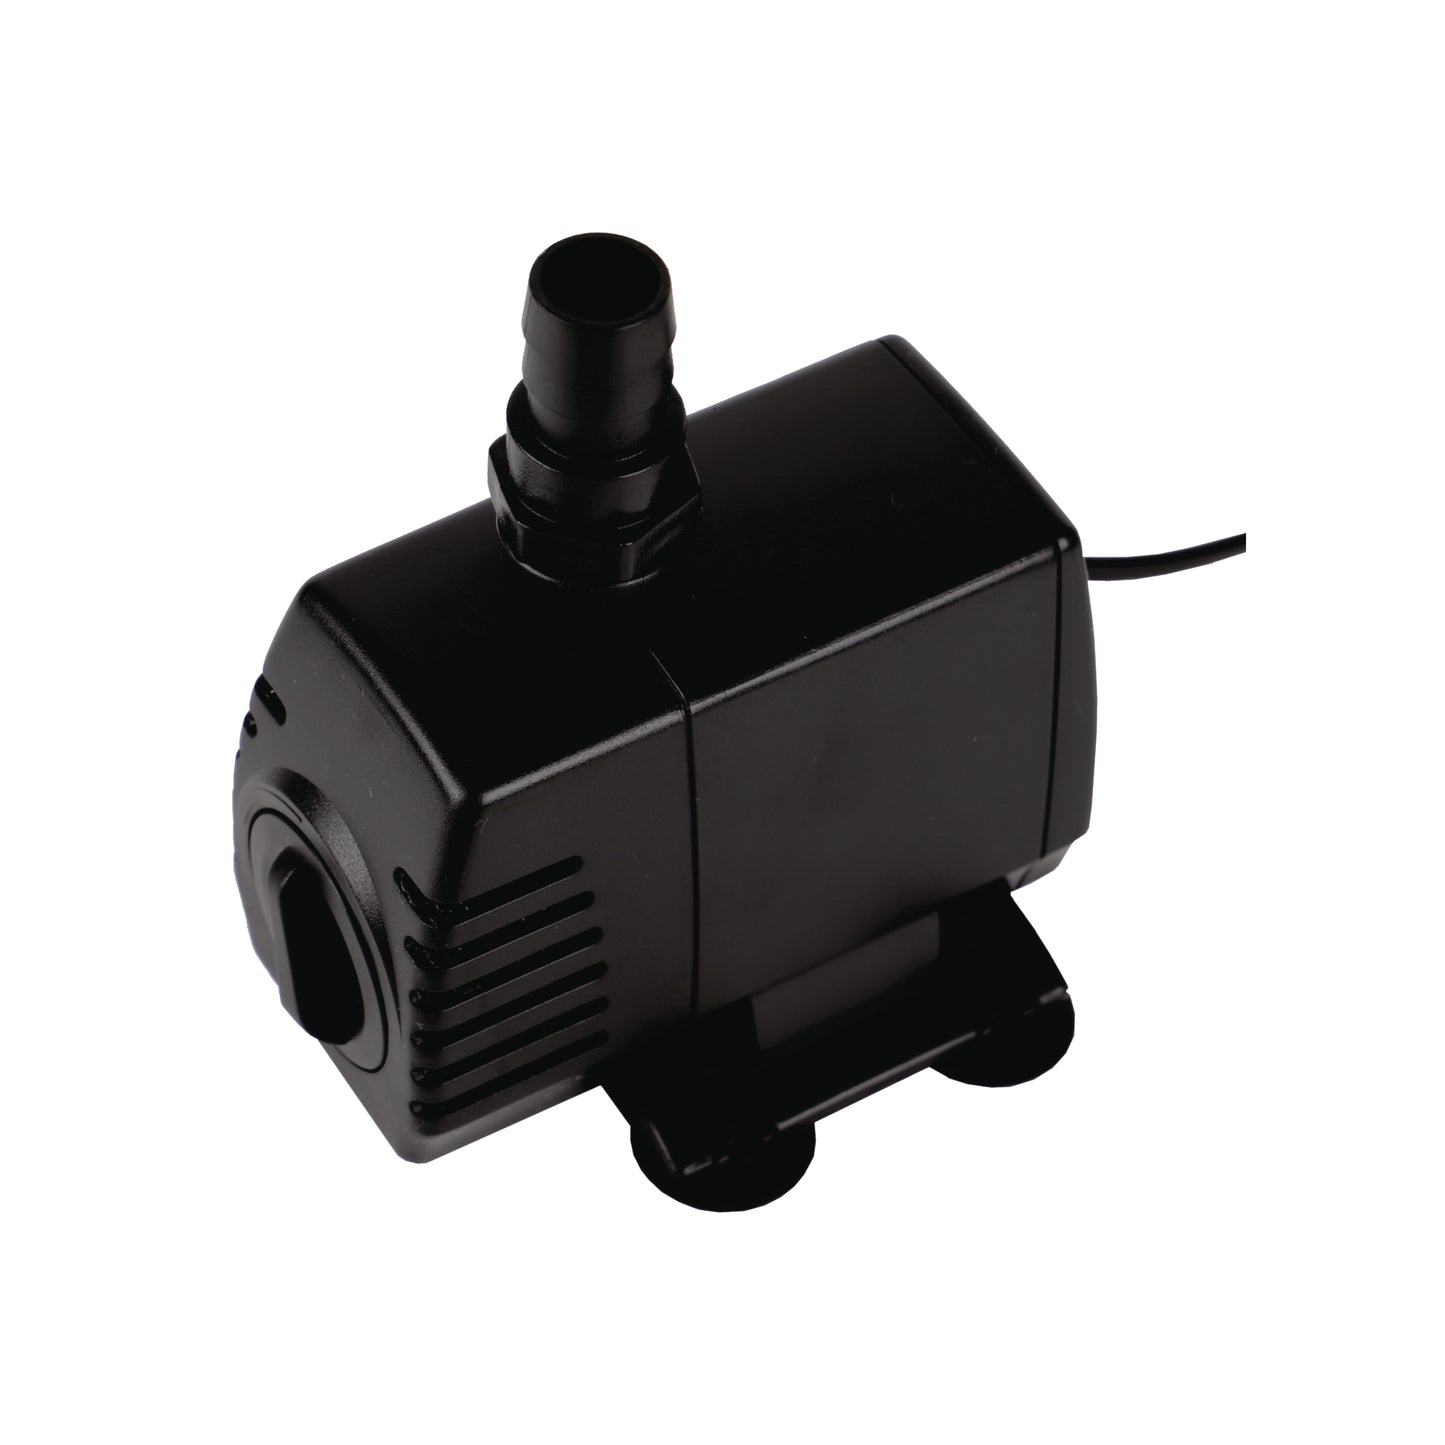 Waterfall Pumps - Pond or Fountain Submersible - Water Pump - 1500L/h - 10m